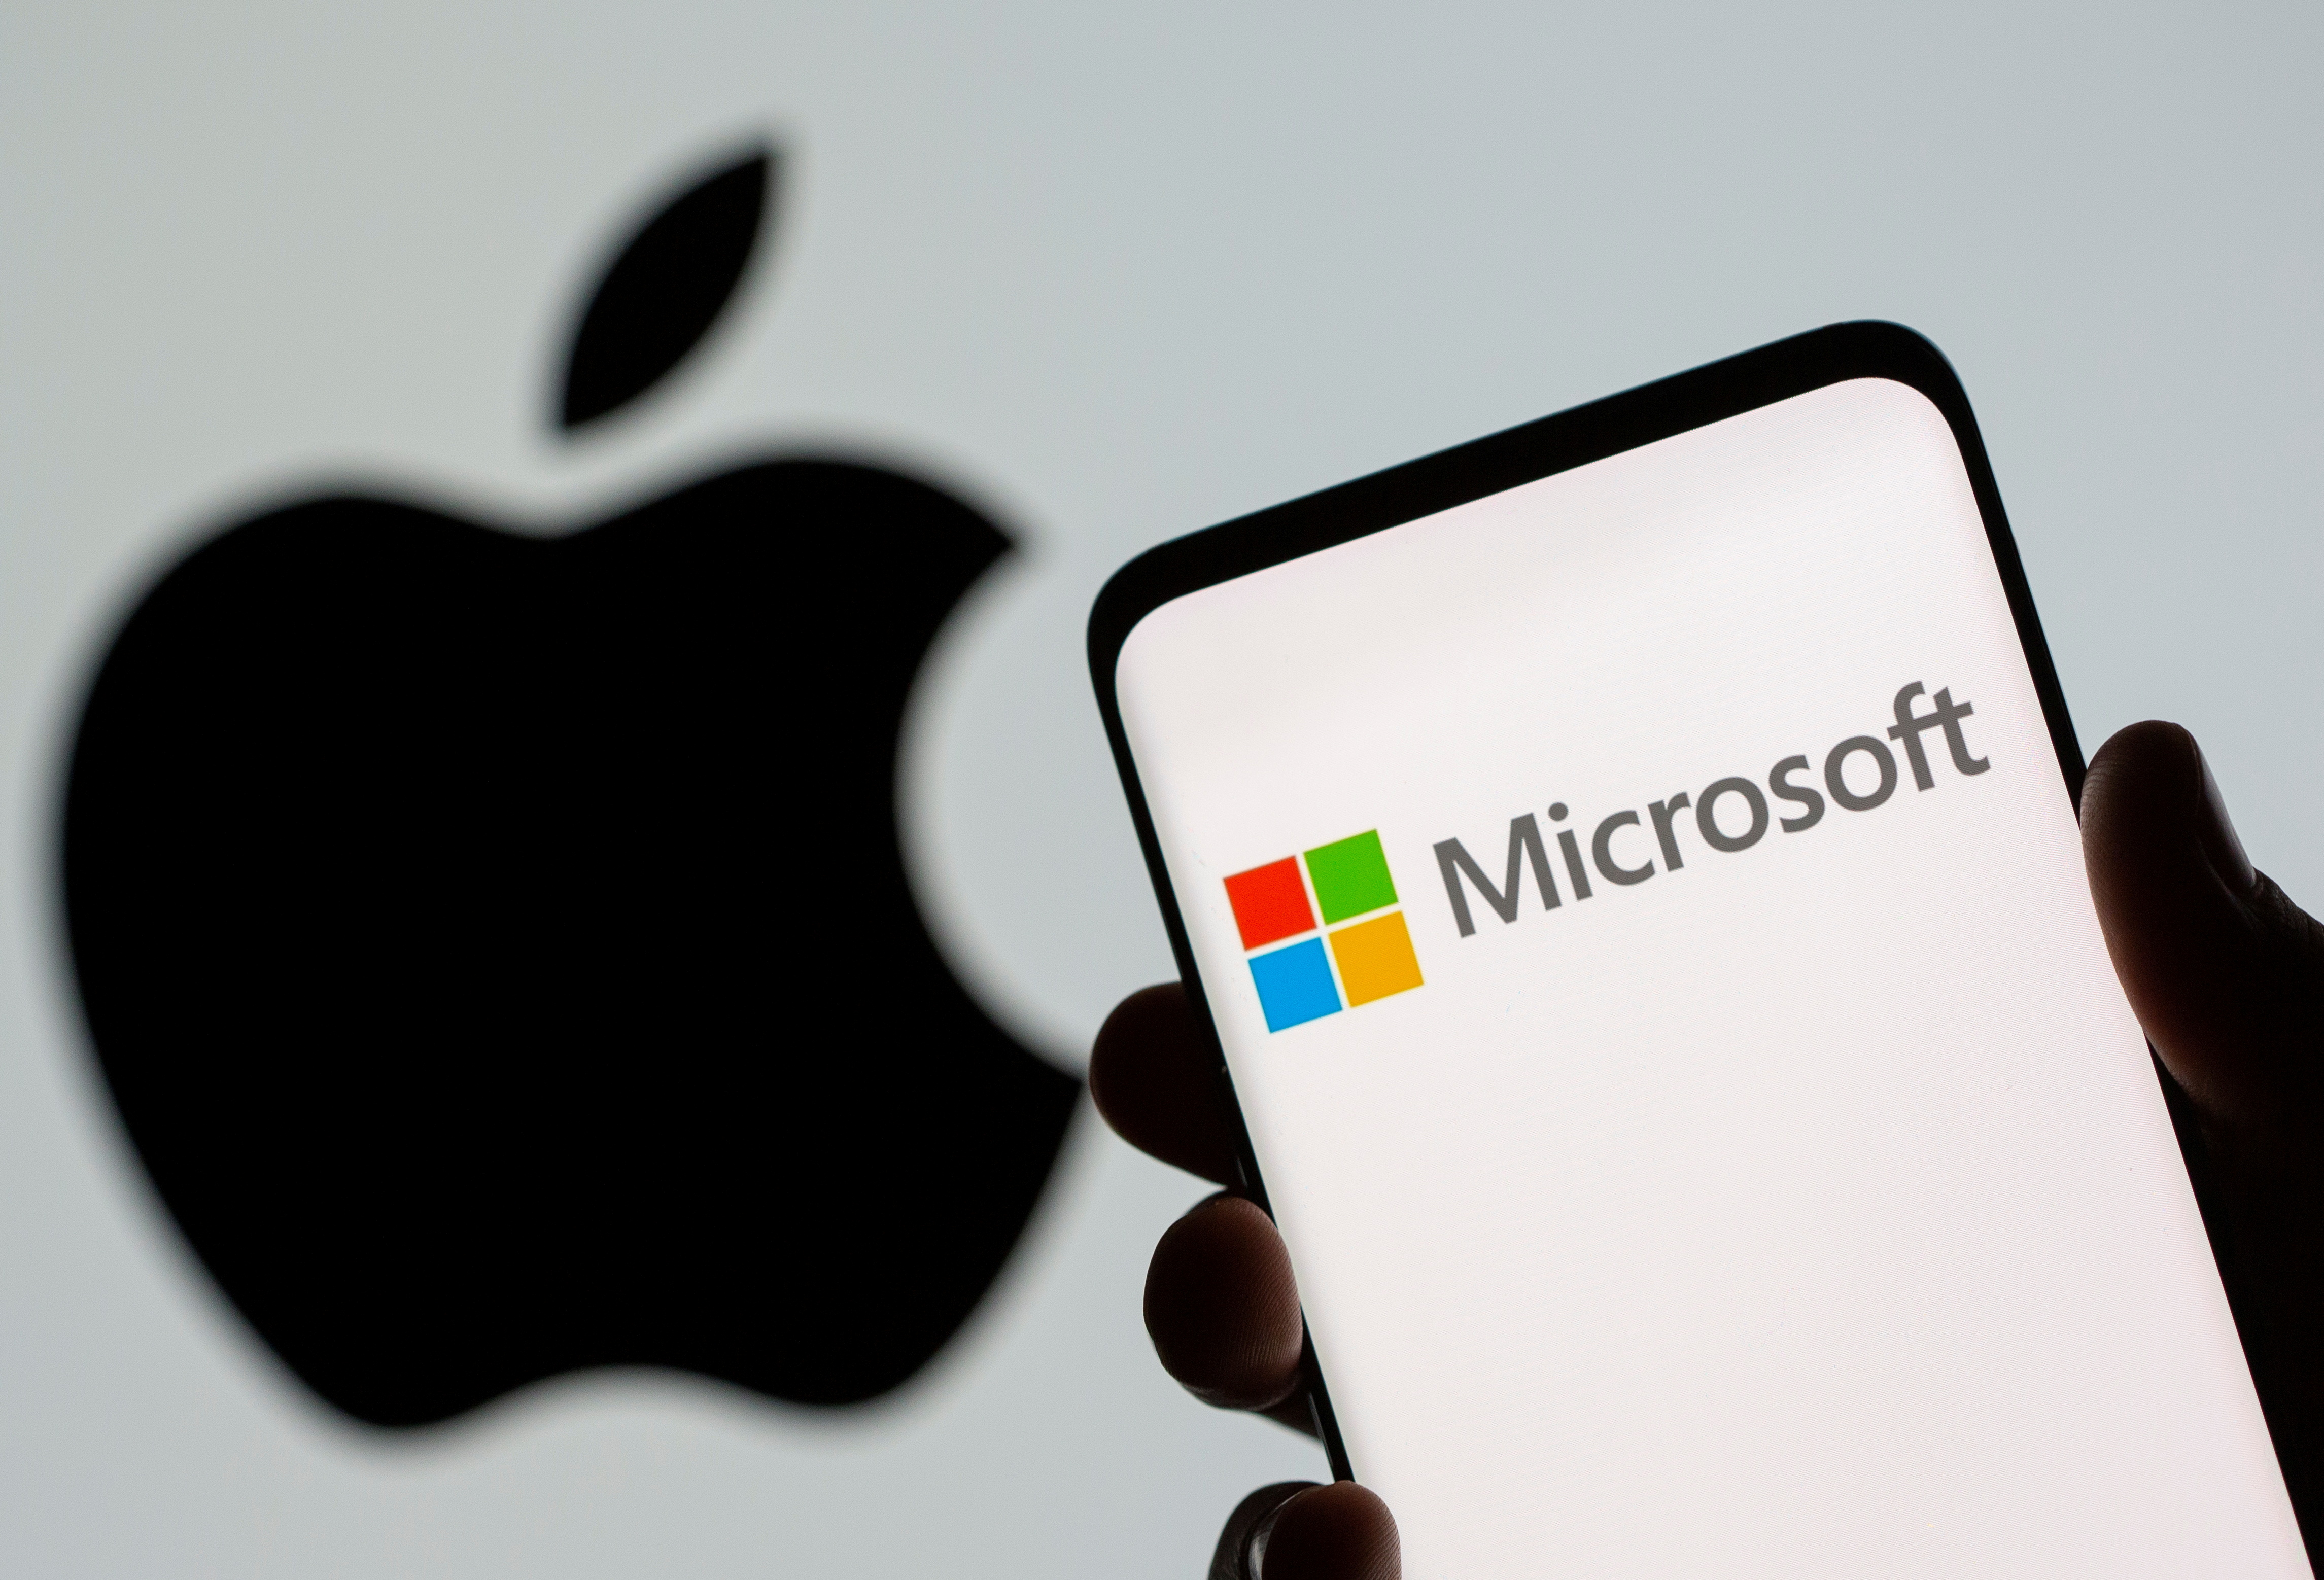 Microsoft logo is seen on the smartphone in front of displayed Apple logo in this illustration taken, July 26, 2021. REUTERS/Dado Ruvic/Illustration